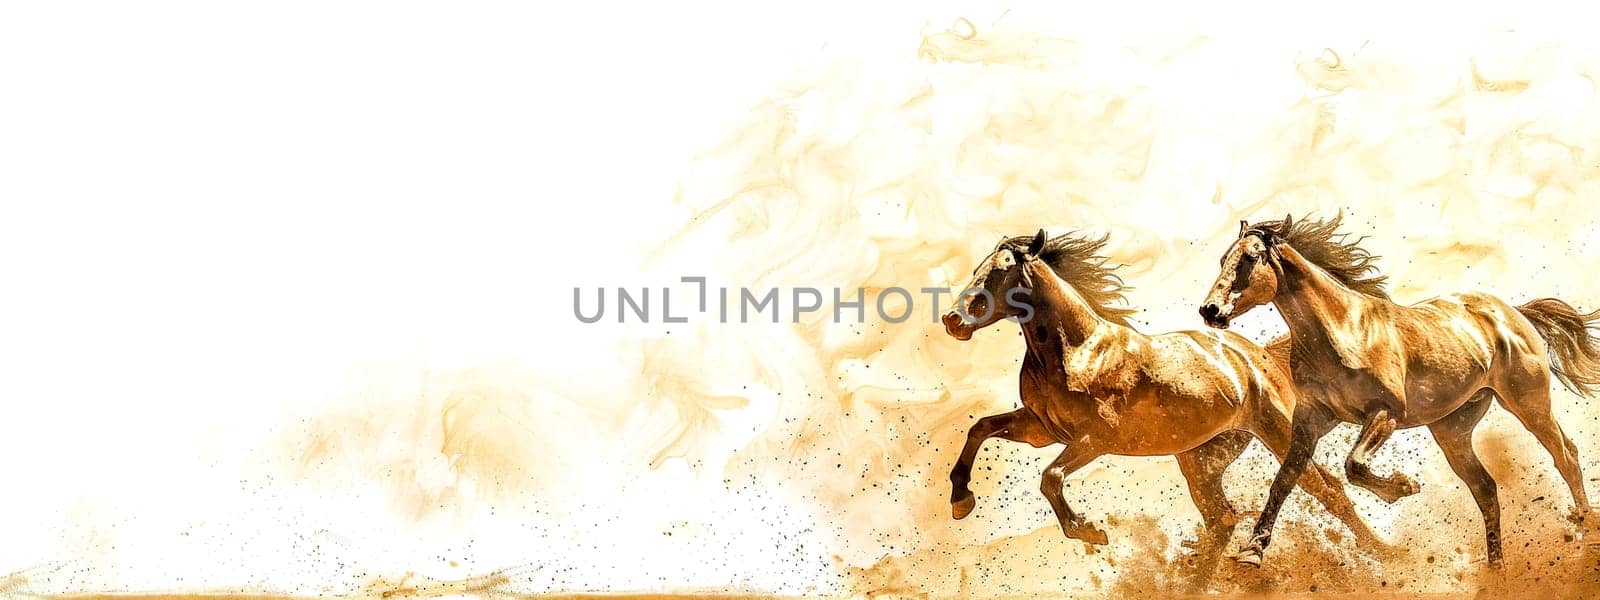 Majestic horses running with abstract watercolor splashes by Edophoto